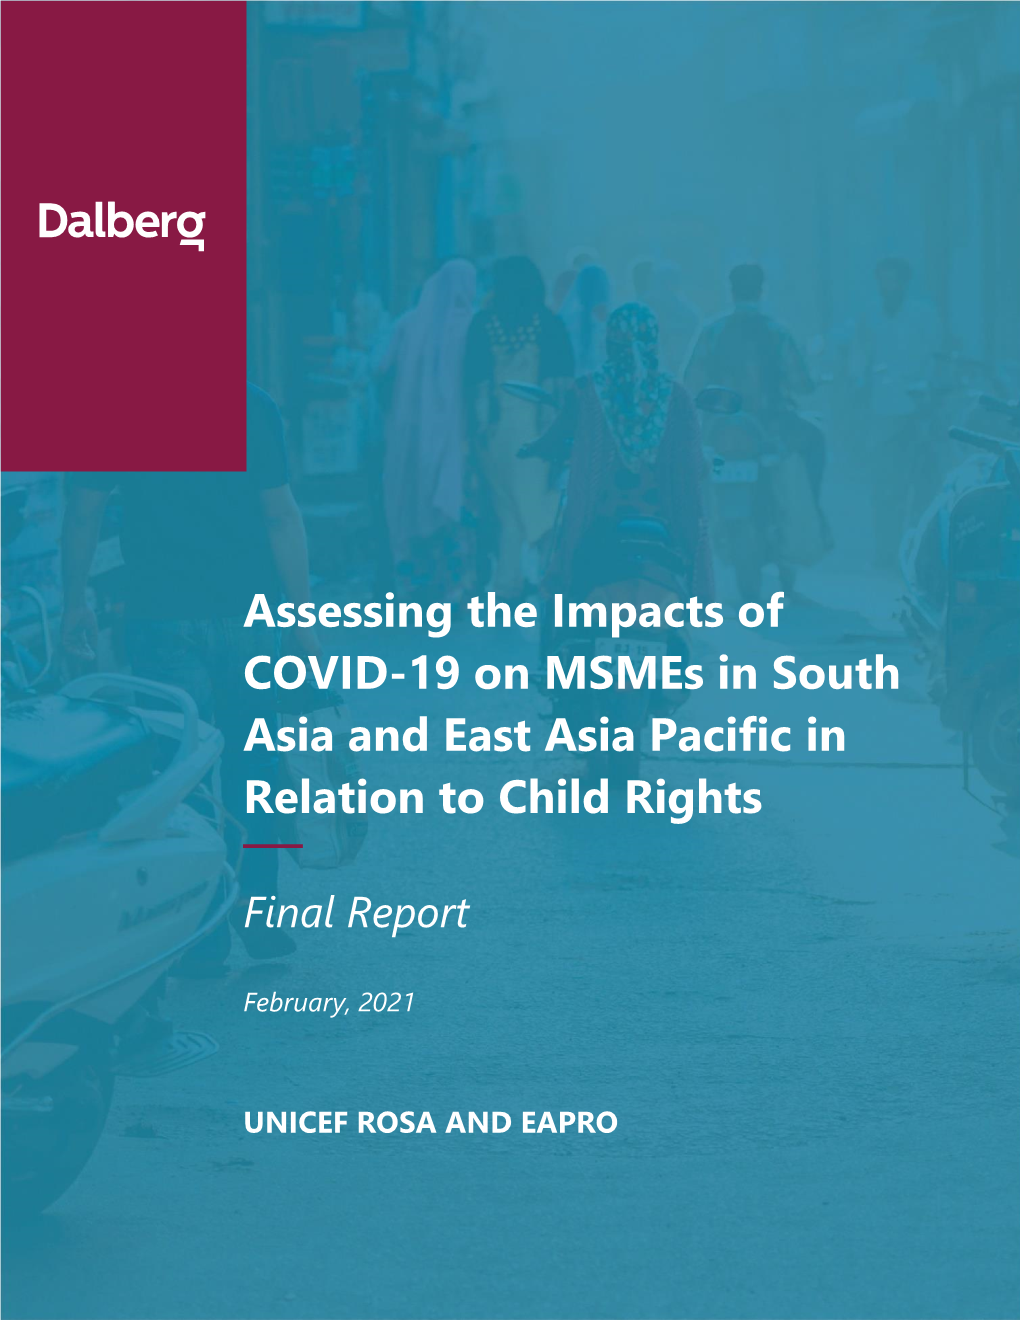 Assessing the Impacts of COVID-19 on Msmes in South Asia and East Asia Pacific in Relation to Child Rights